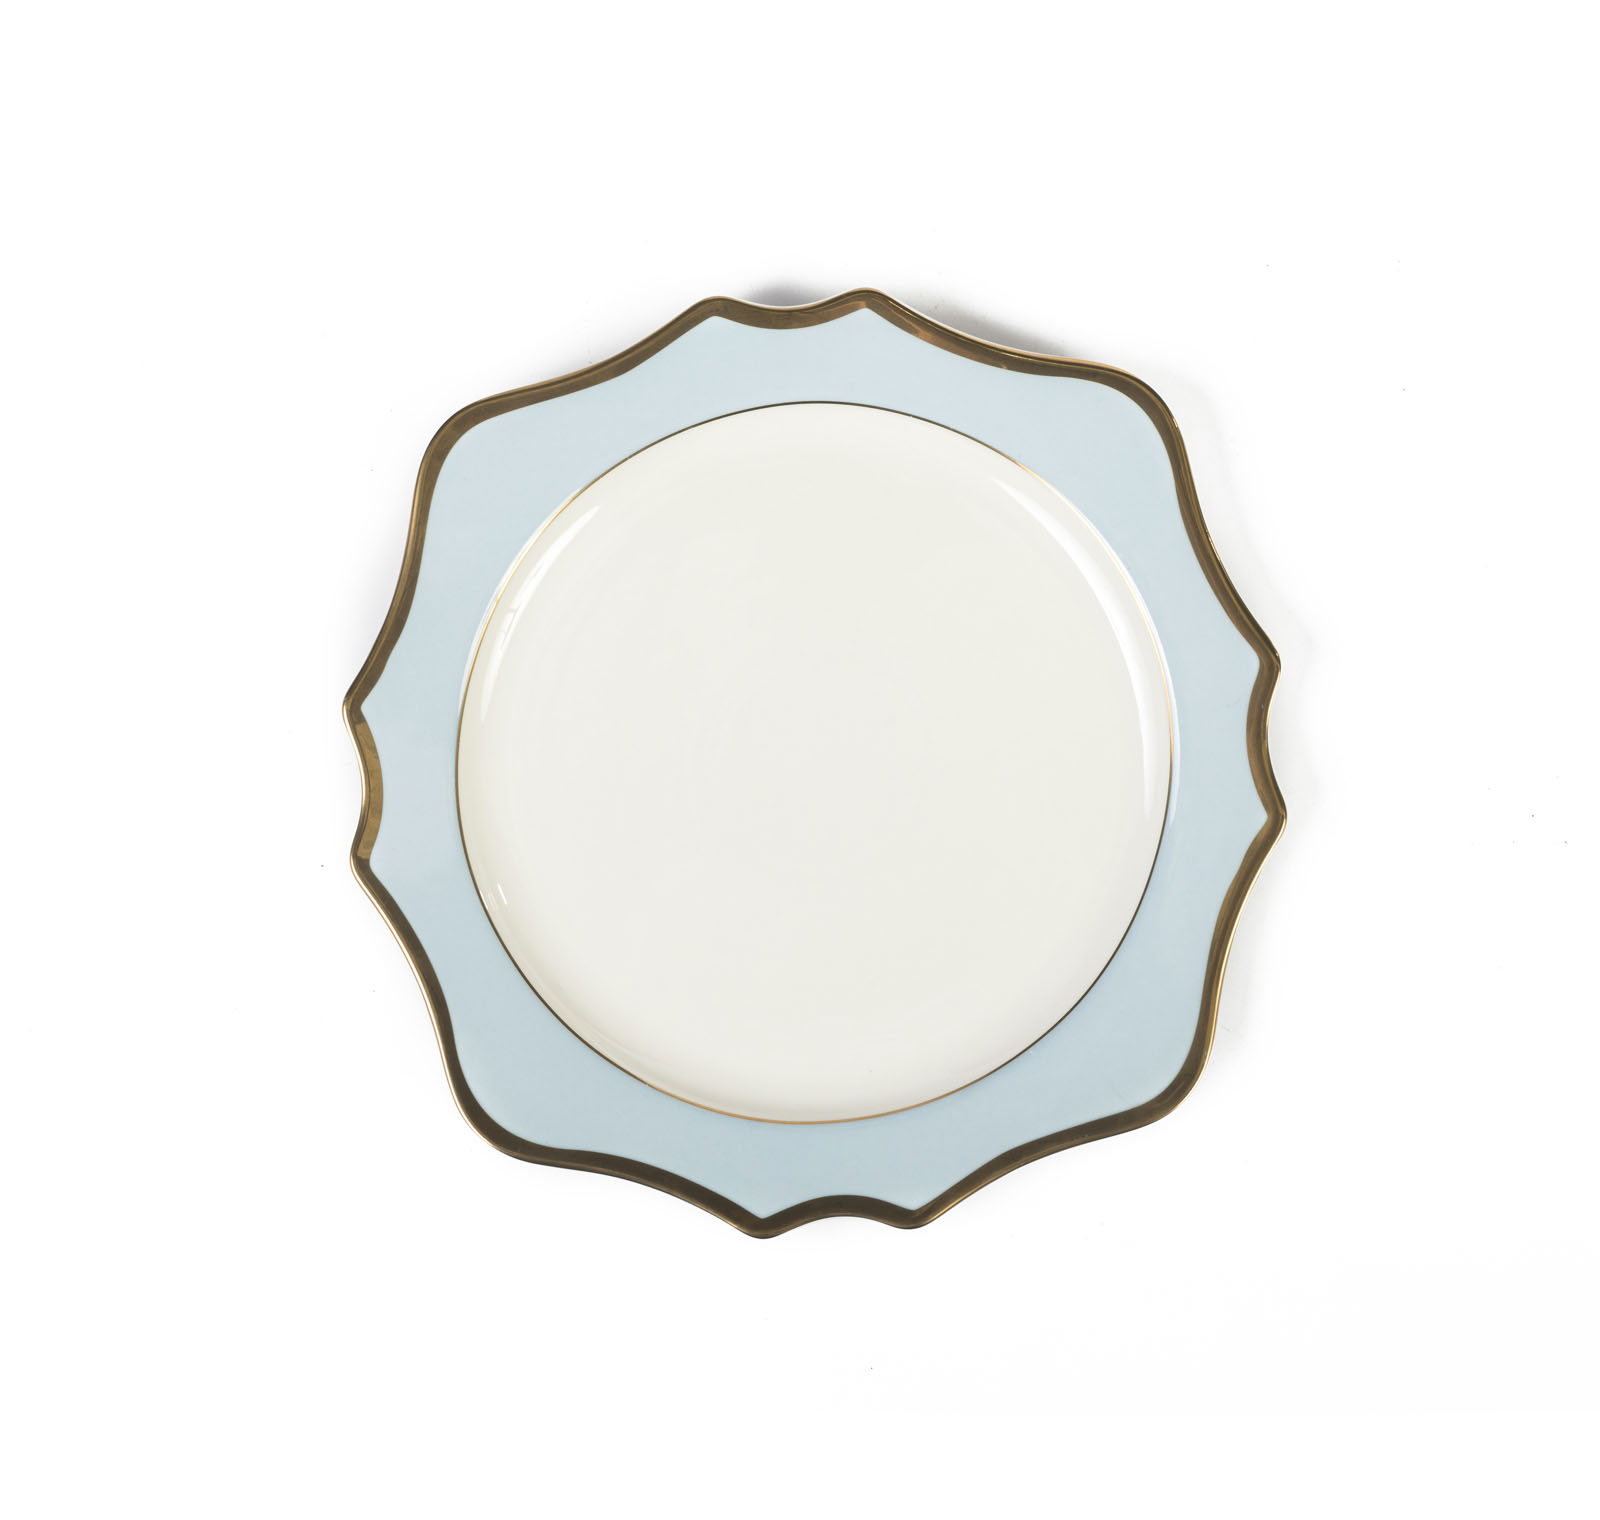 Azzurro Blue Sunflower Charger Plate